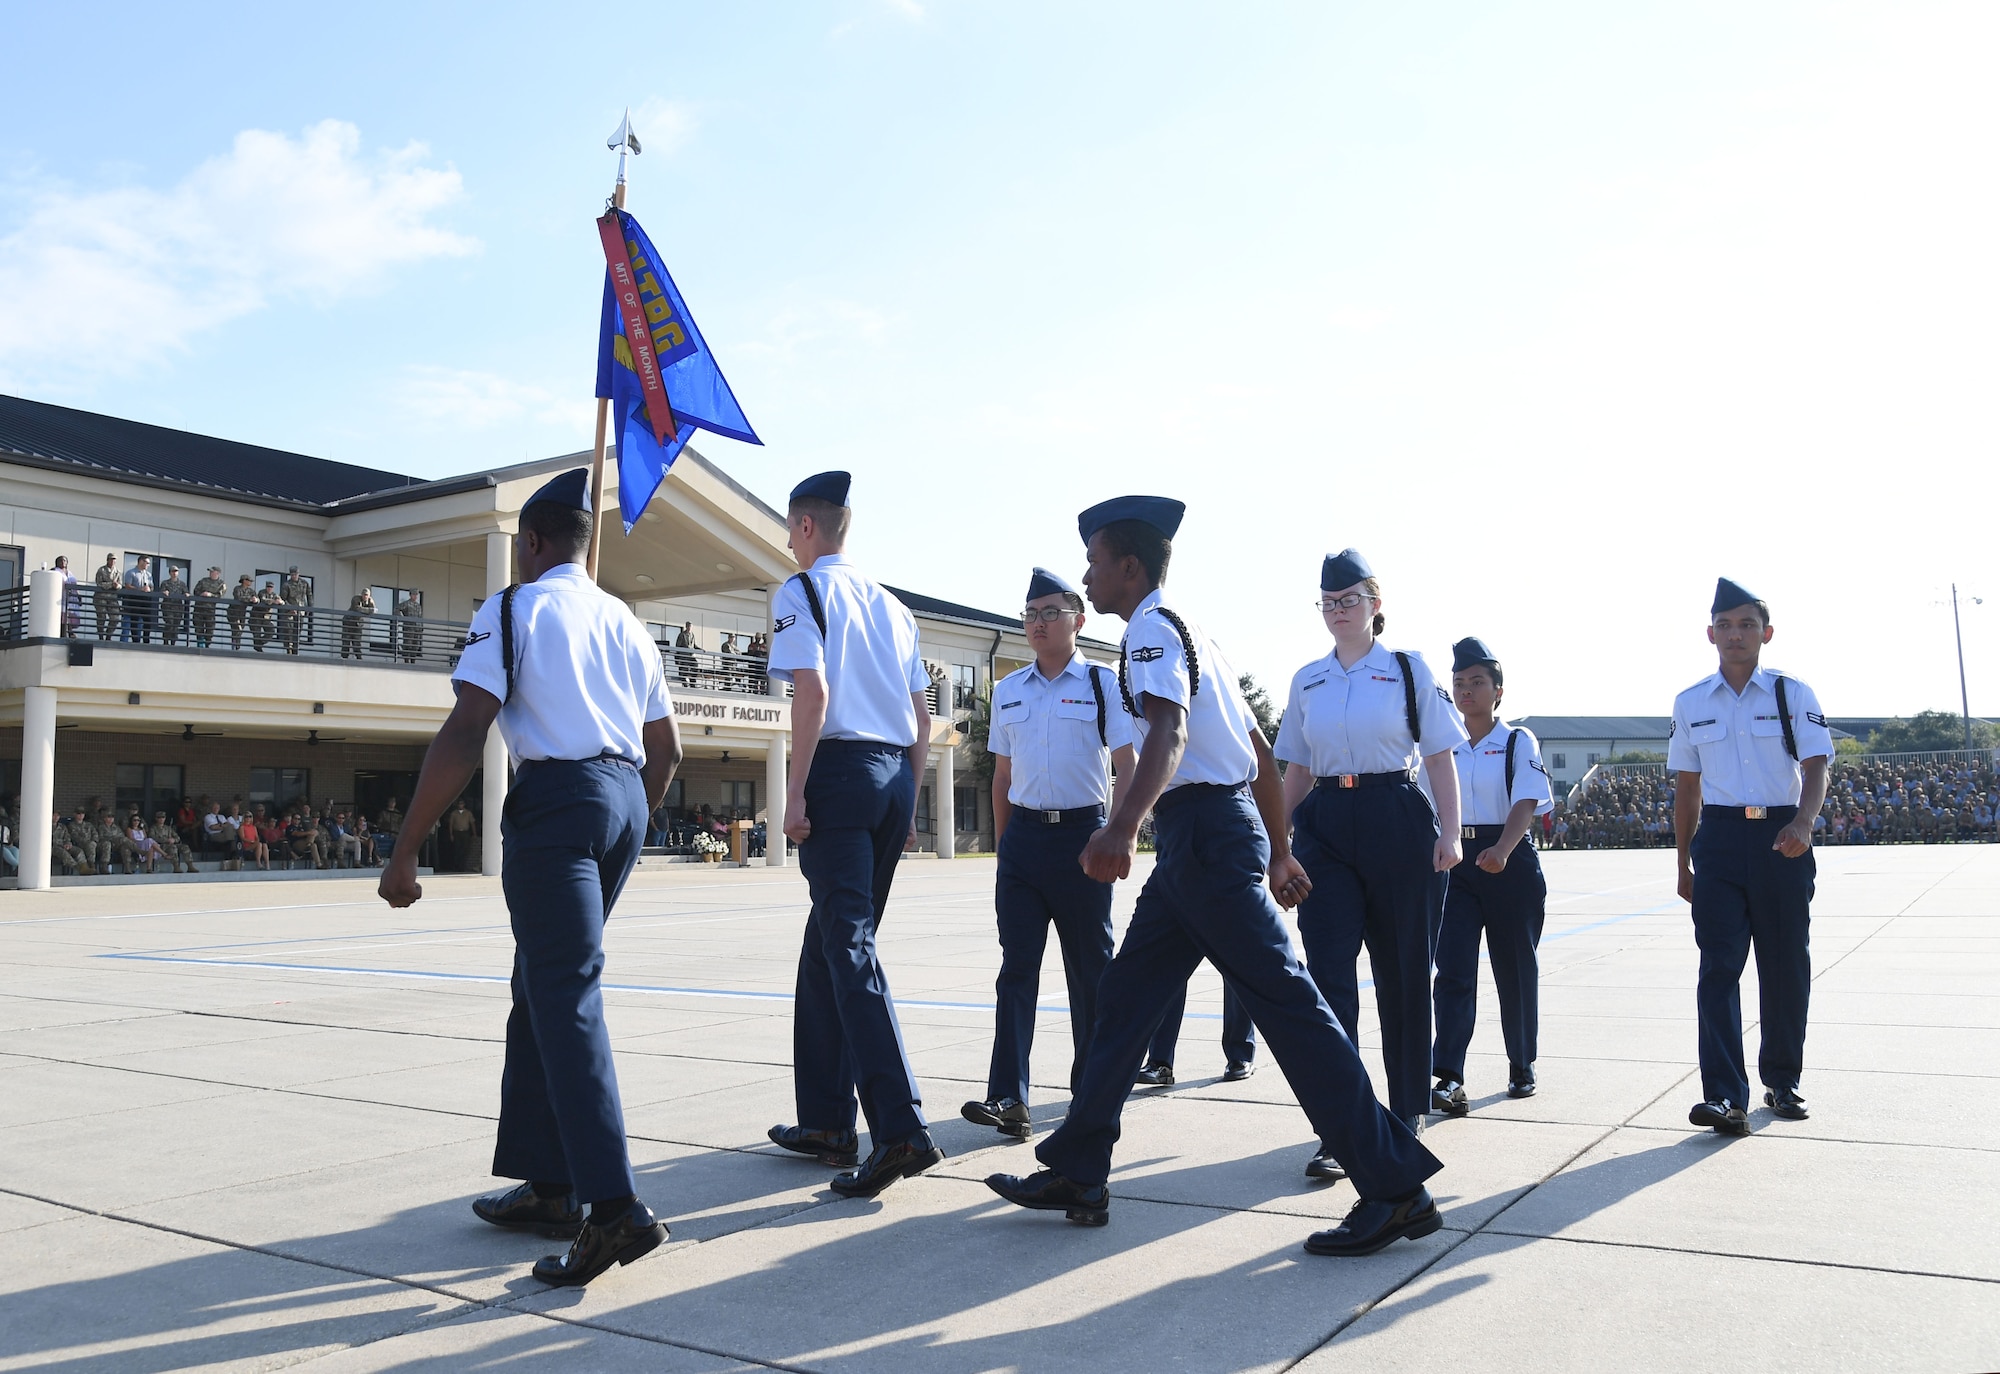 Members of the 335th Training Squadron regulation drill team perform during the 81st Training Group drill down on the Levitow Training Support Facility drill pad at Keesler Air Force Base, Mississippi, Sept. 16, 2022. Keesler trains more than 30,000 students each year. While in training, Airmen are given the opportunity to volunteer to learn and execute drill down routines. (U.S. Air Force photo by Kemberly Groue)